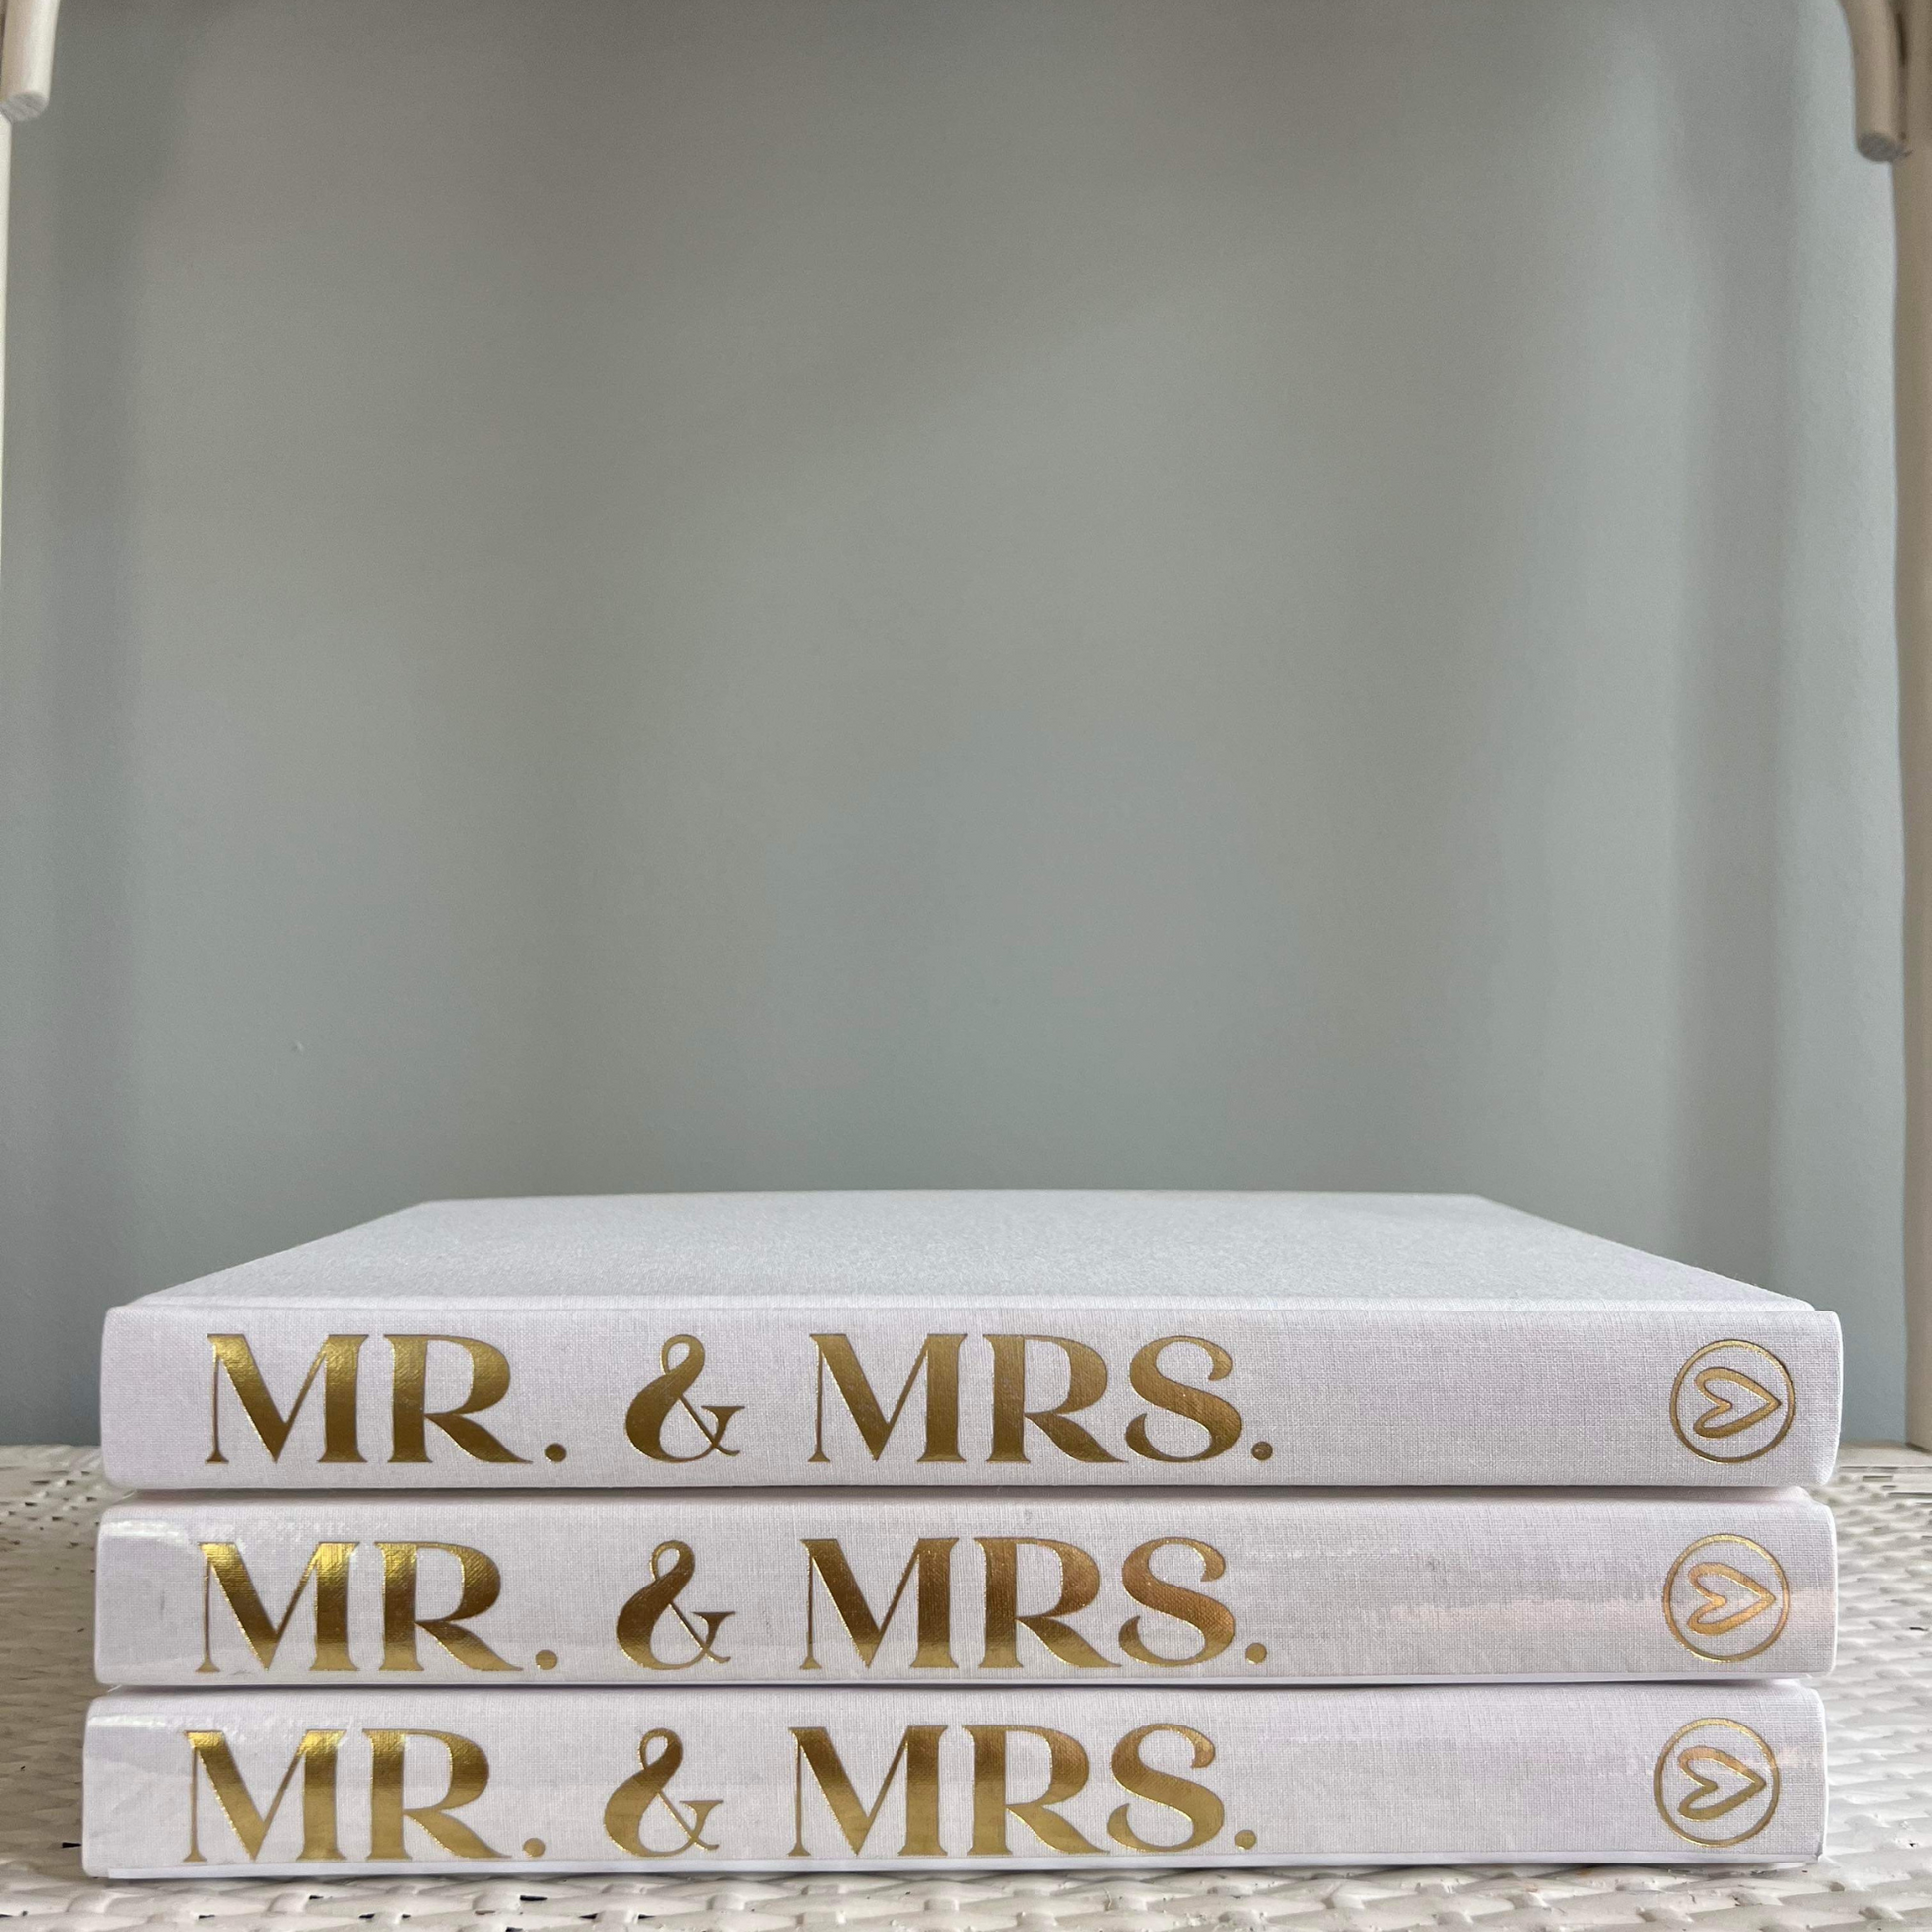 Mr. & Mrs. Coffee Table Book – Nona Ruth's